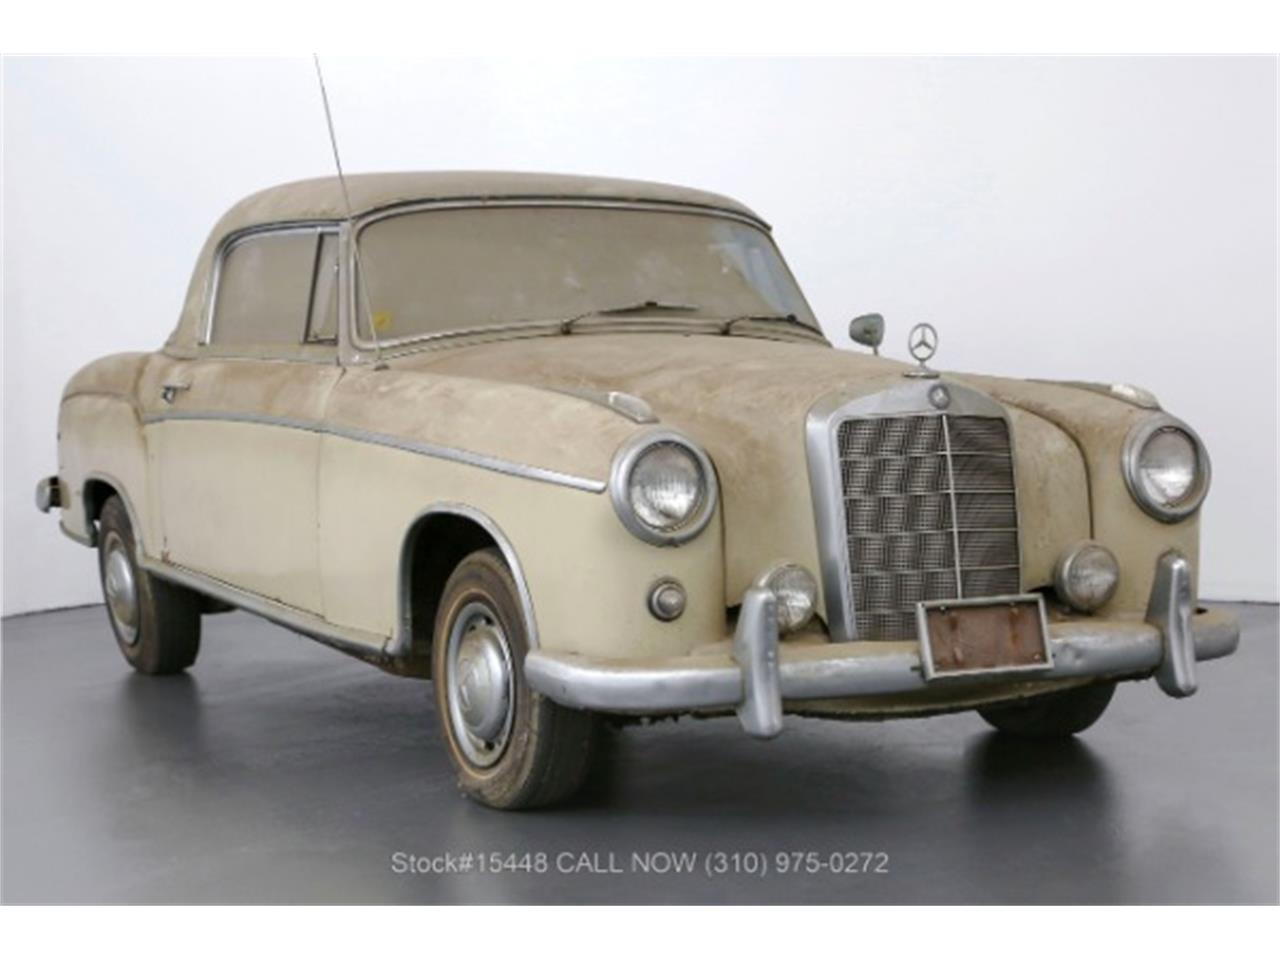 For Sale: 1958 Mercedes-Benz 220S in Beverly Hills, California for sale in Beverly Hills, CA